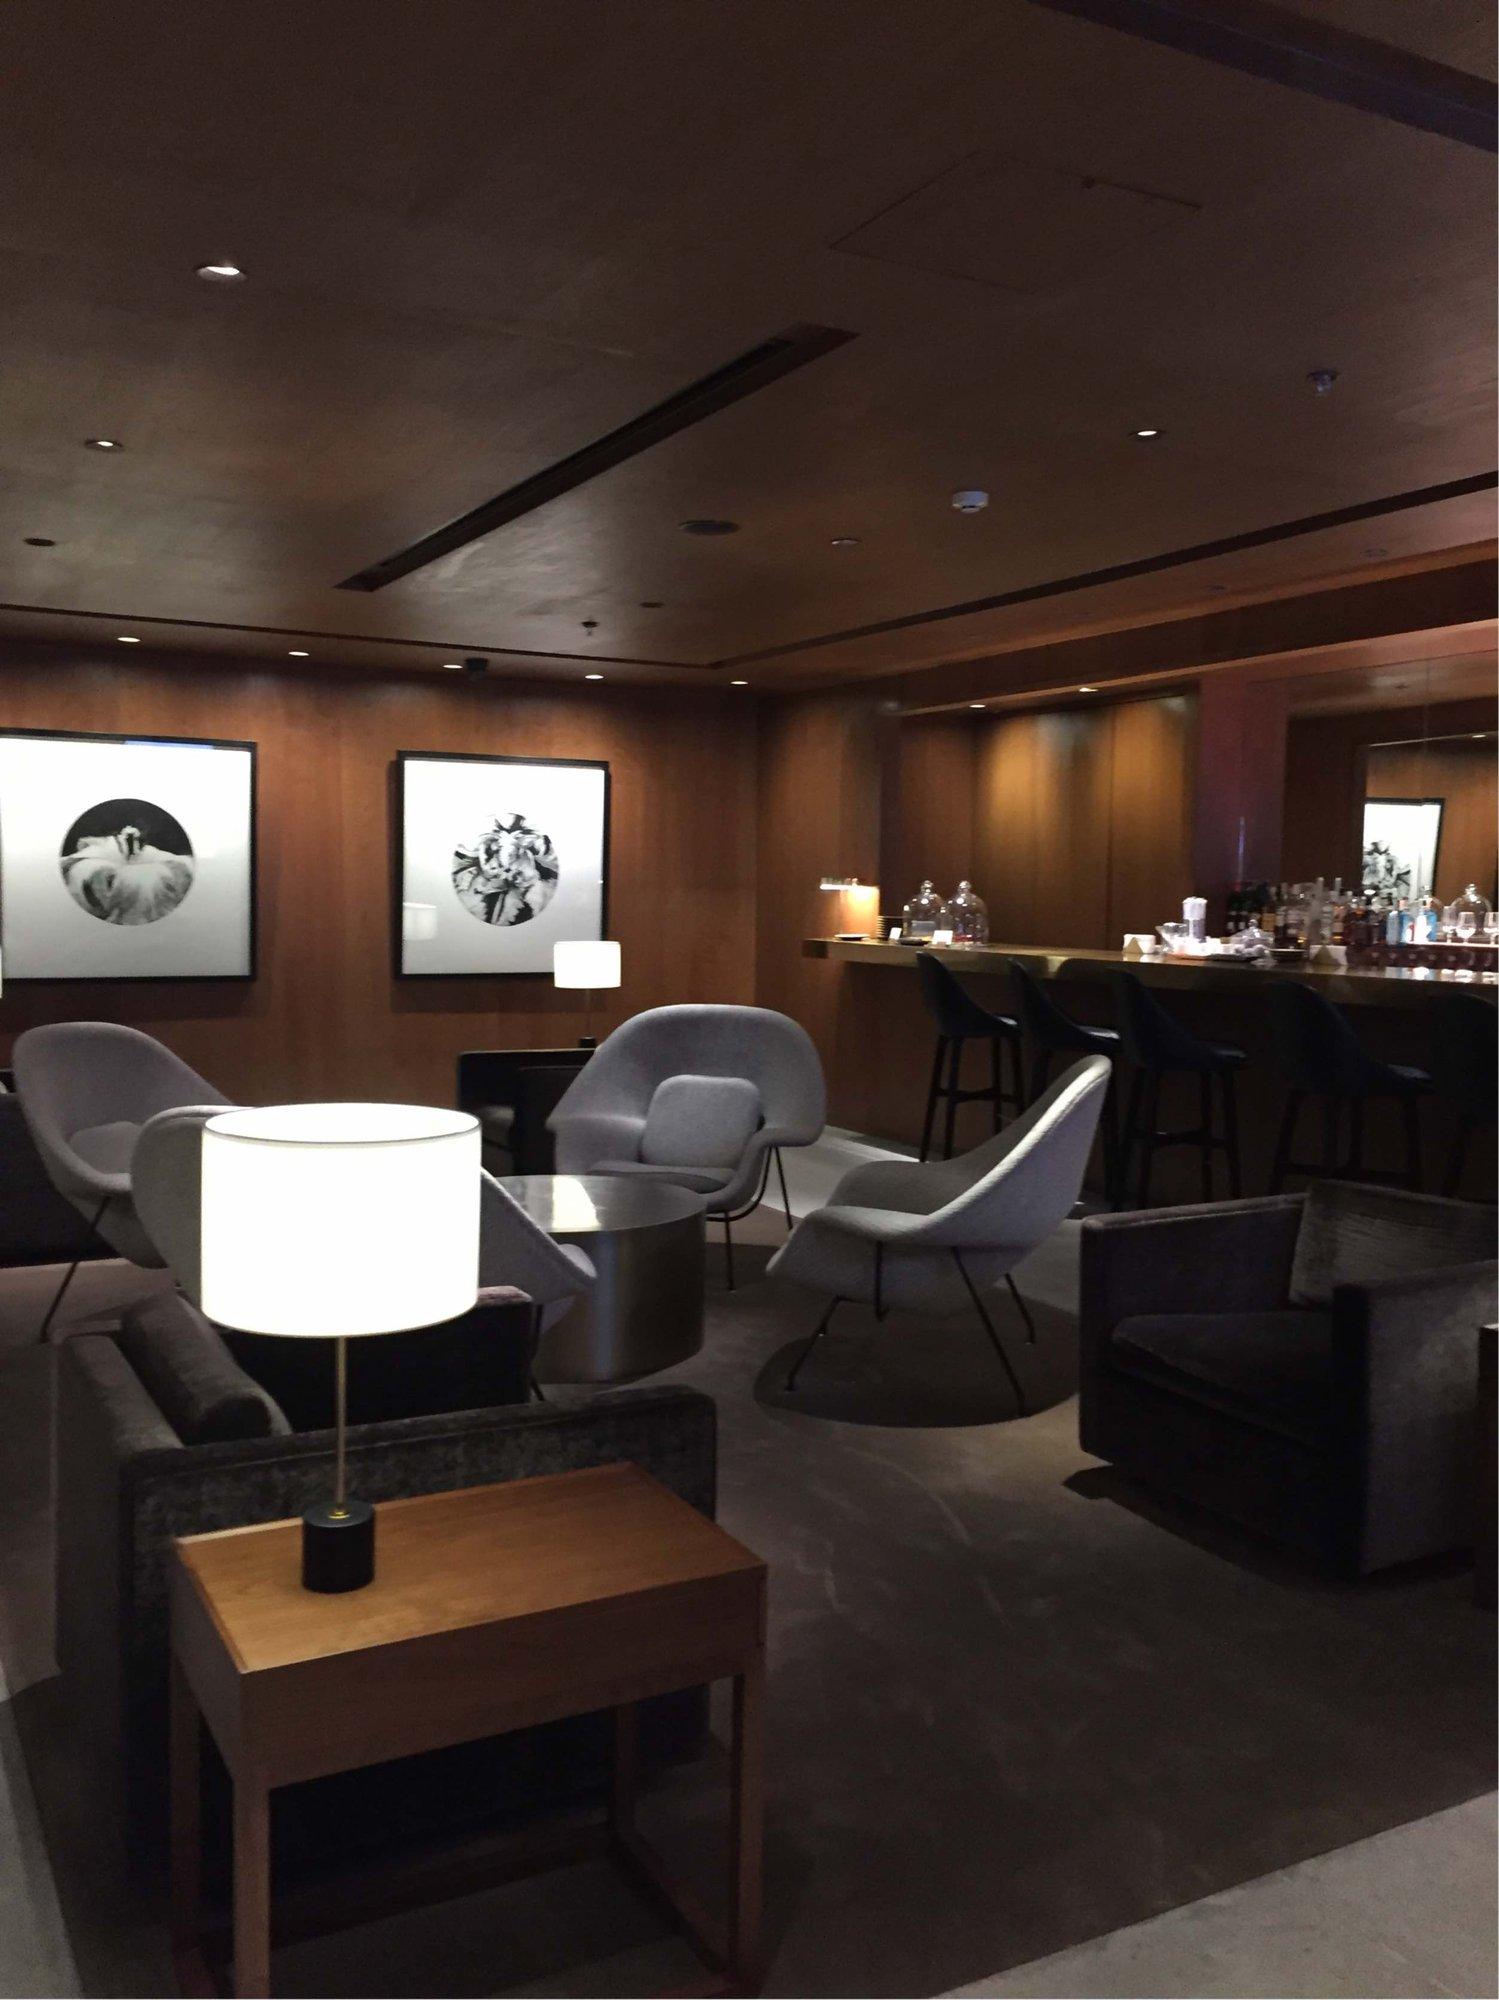 Cathay Pacific First and Business Class Lounge image 9 of 19